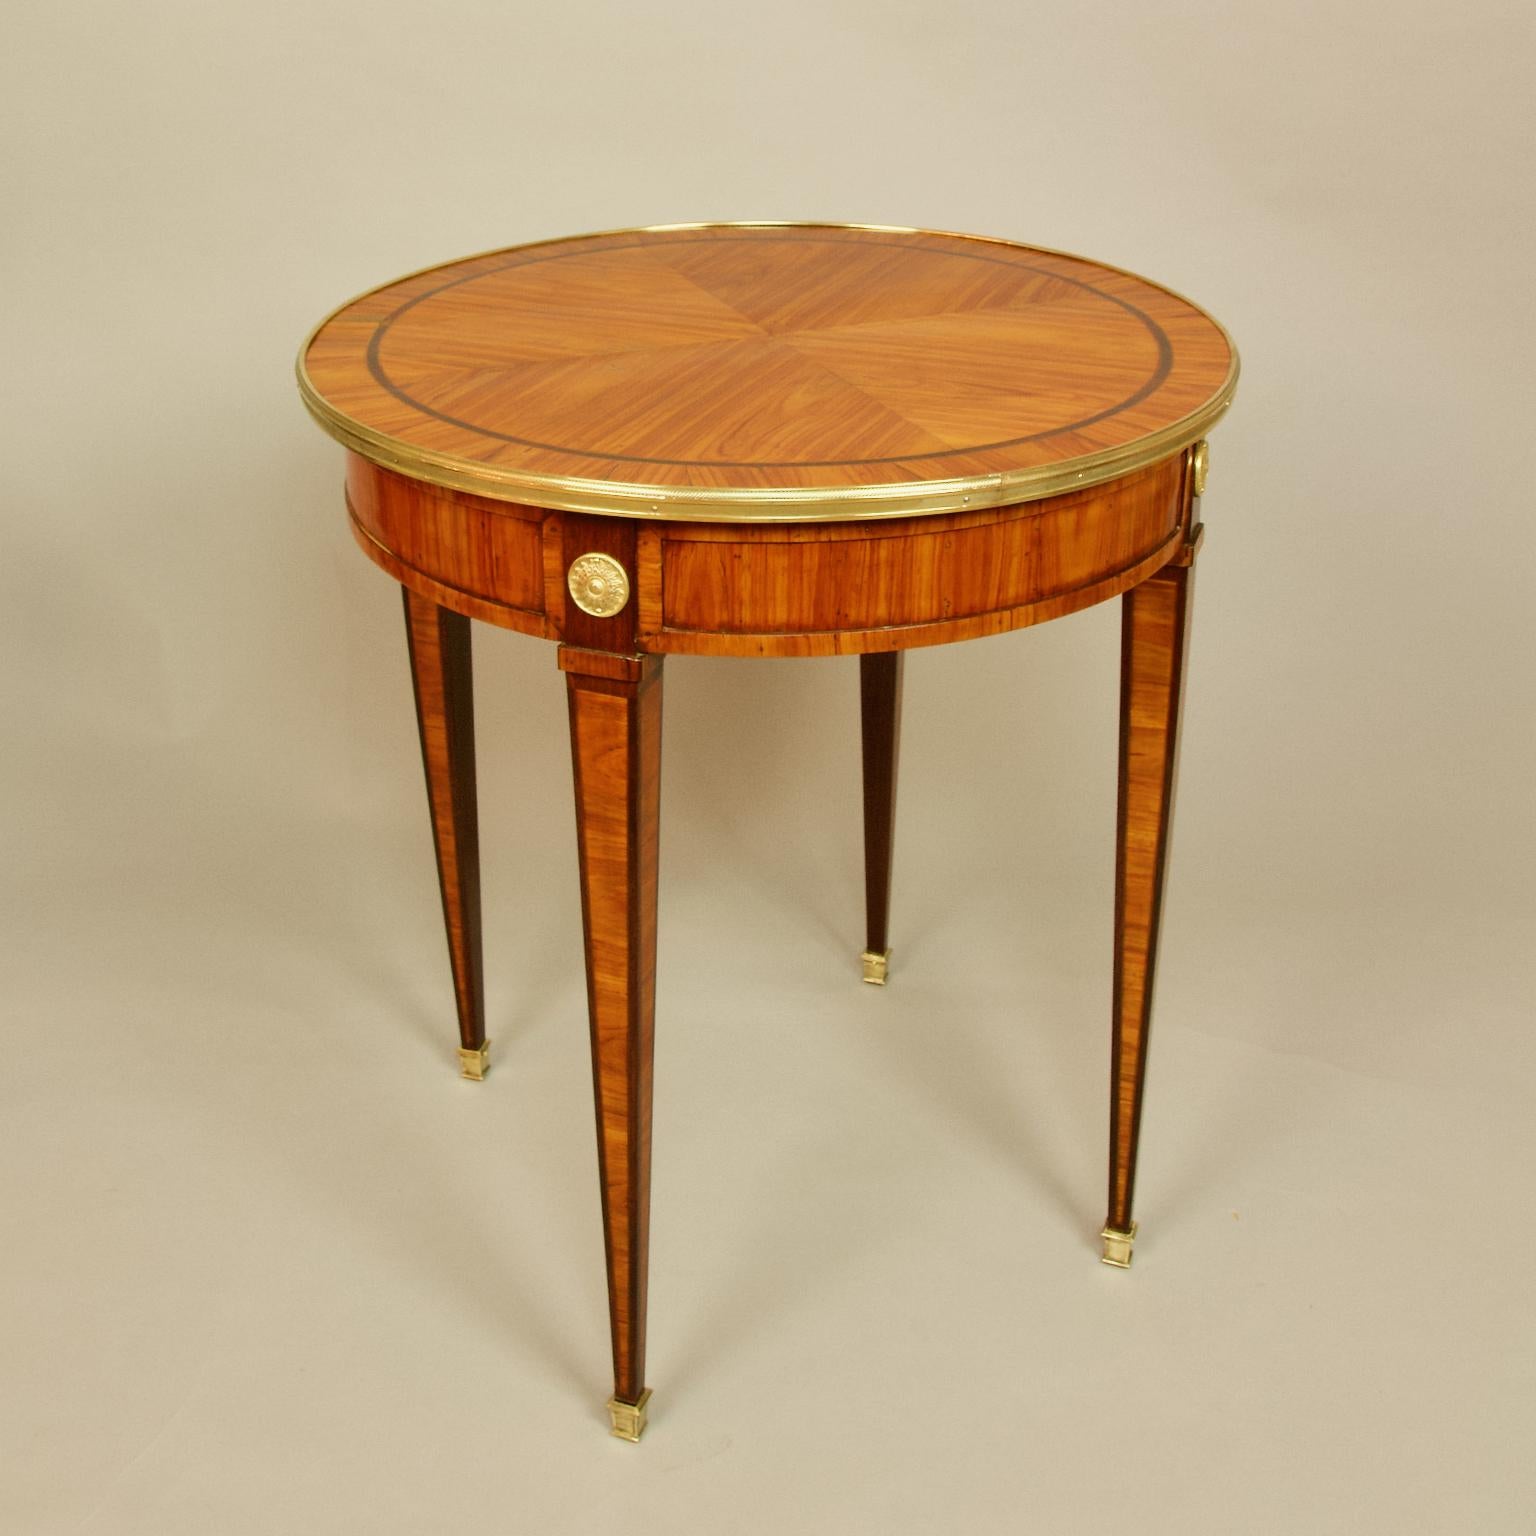 Leather French Louis XVI 18th Century Marquetry Gilt Bronze Round Side Table or Gueridon